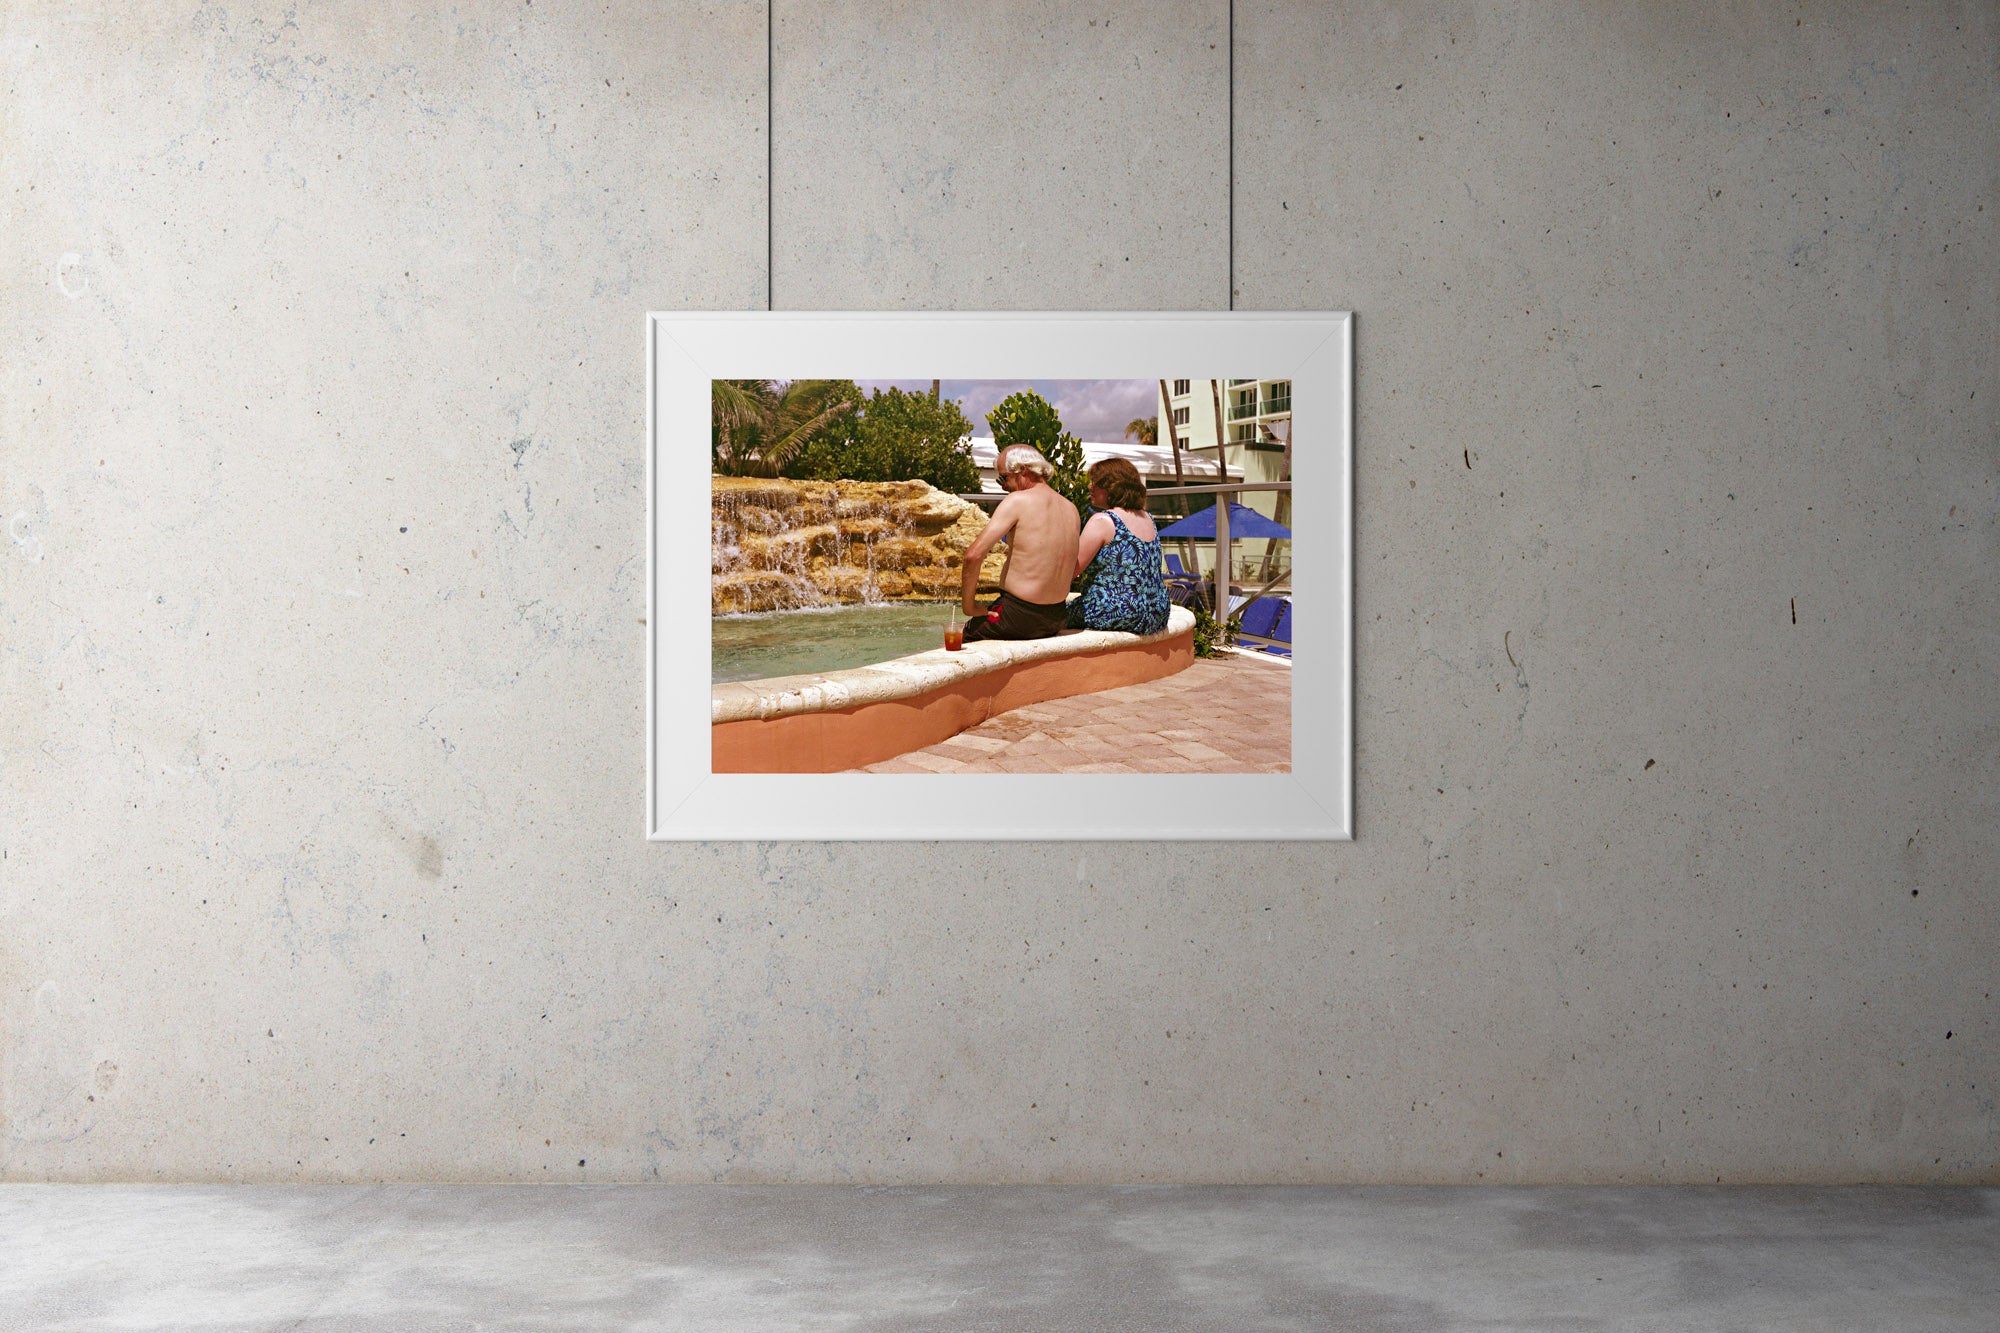 A couple sit buy a rock pool in a Miami hotel drinking cocktails in 1980’s swim suits. Artwork Prints, wallart, Melbourne travel,  Photographic prints,  Framed artwork,  Australian  Photography, wall art, Hotel art, Prints for sale, USA, Miami Film photography, Vintage photo, style  Interior design, Pictures Abstract film photography, photography art